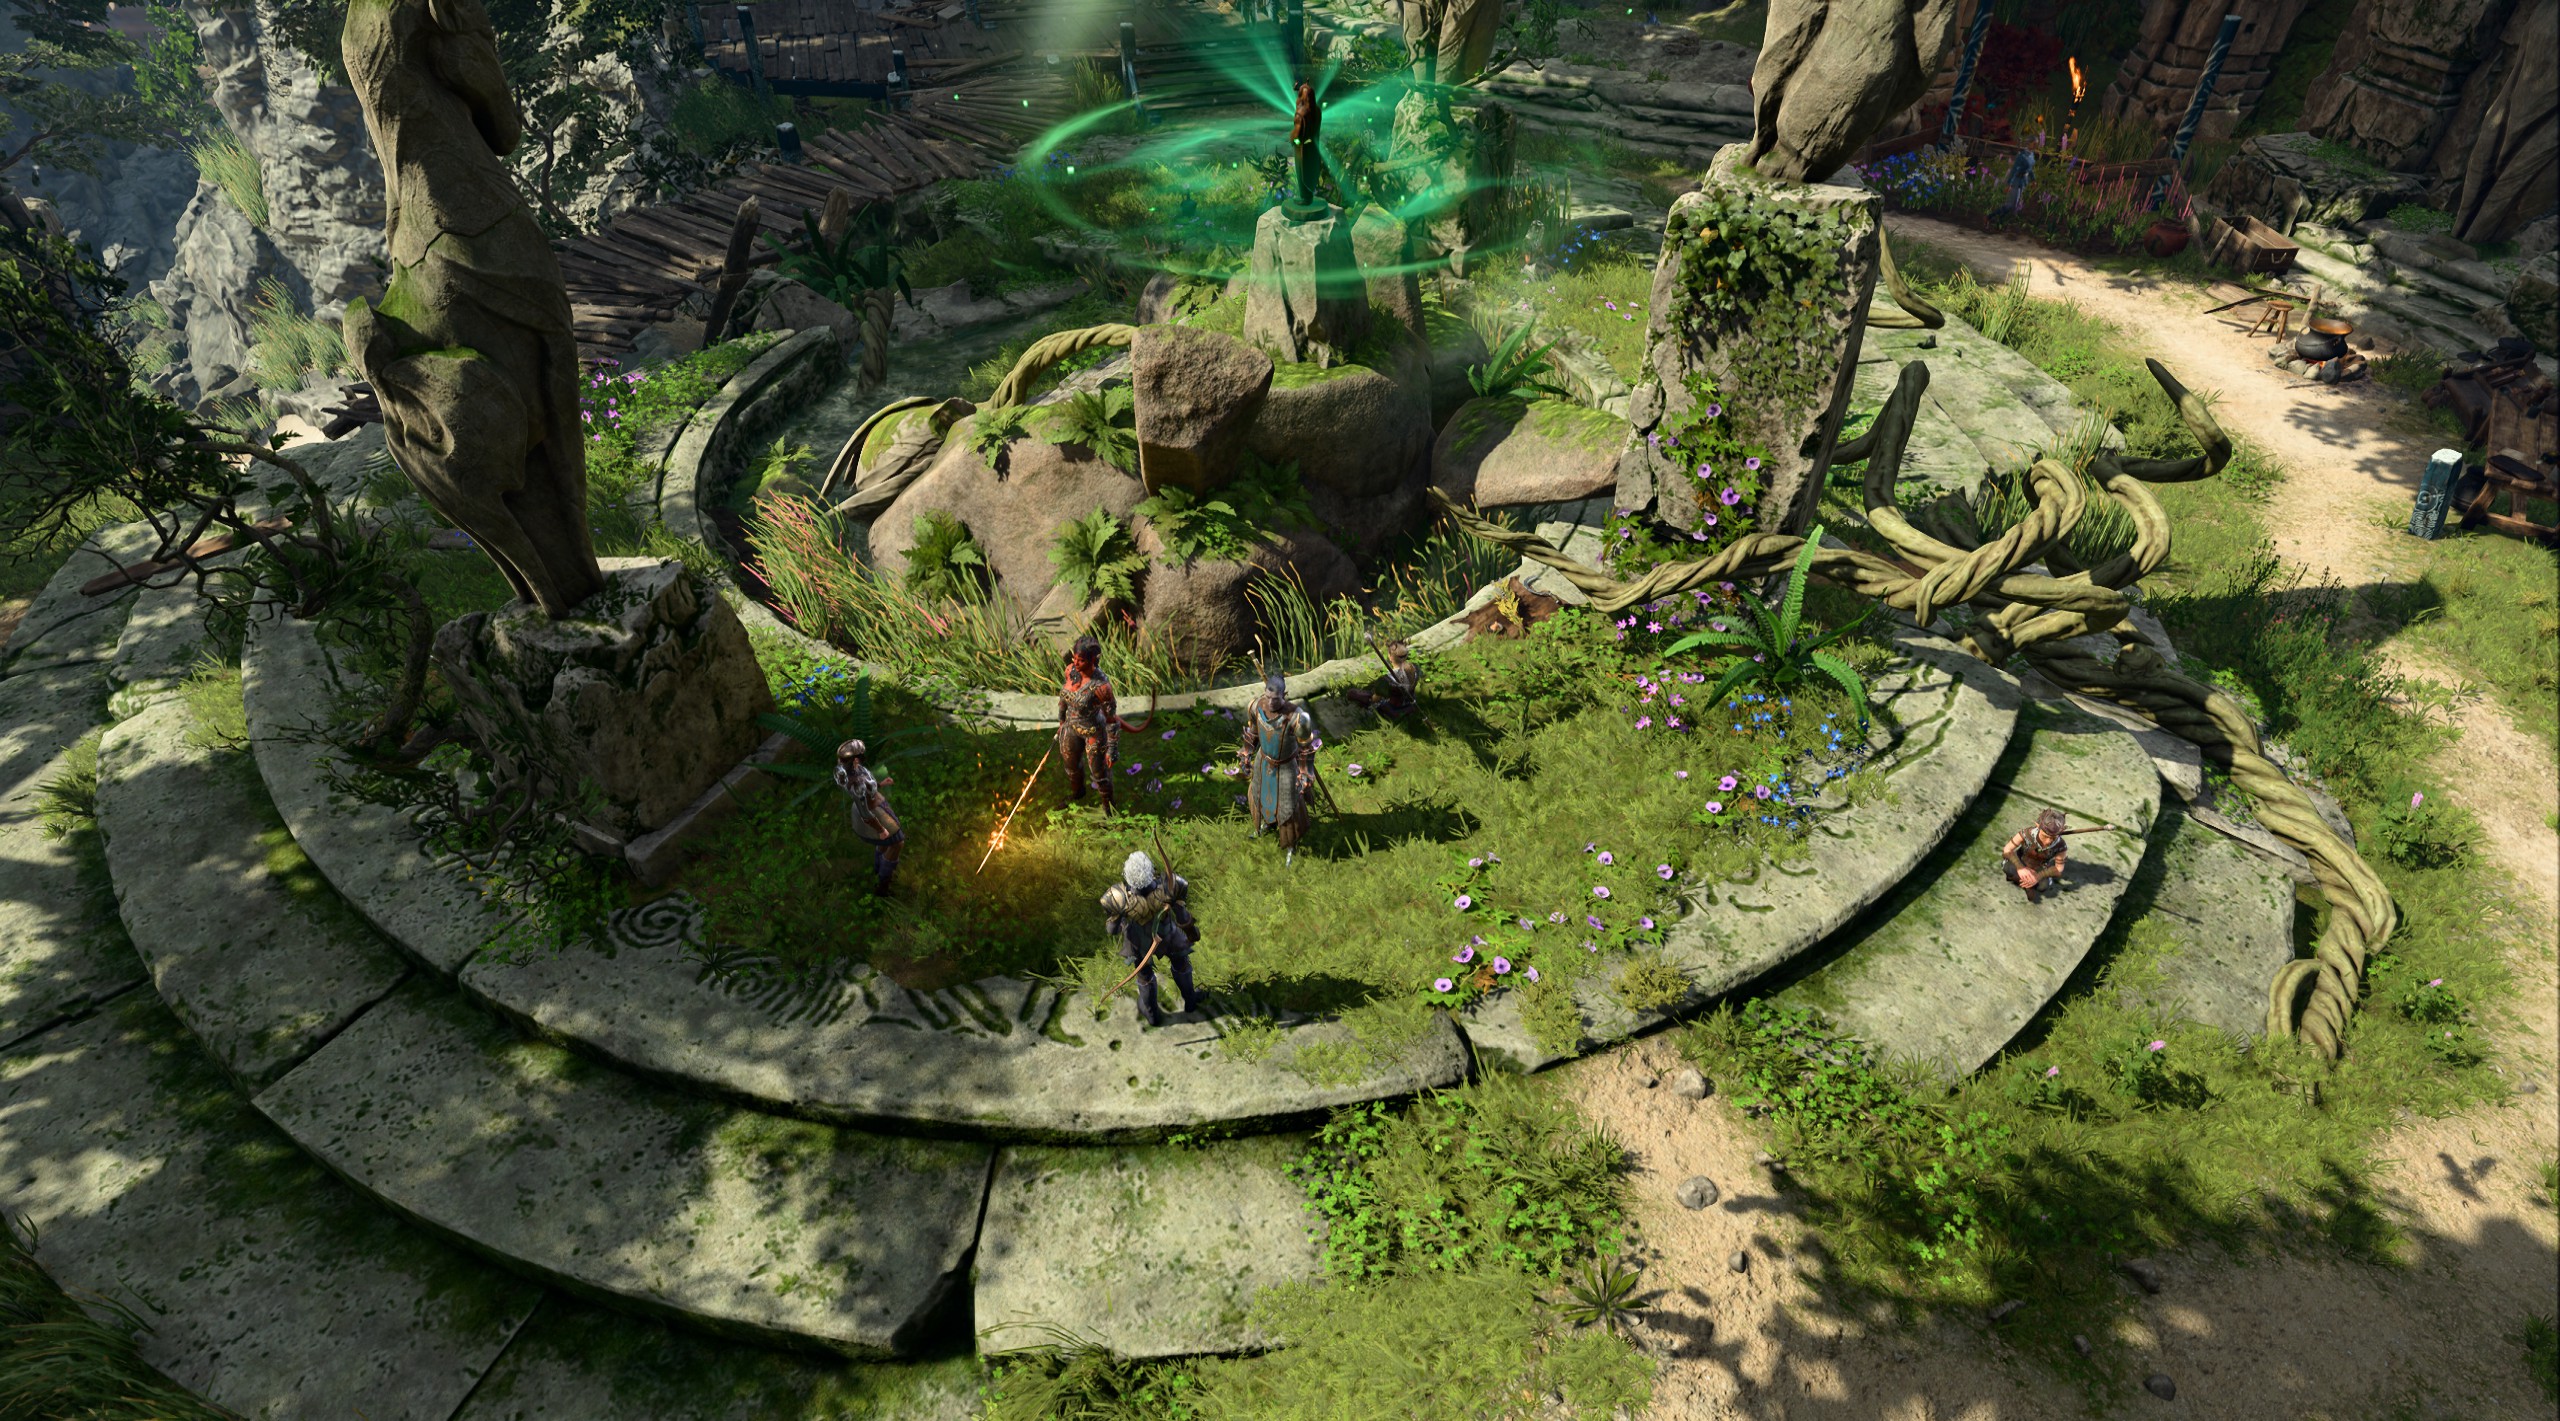 zoomed out view of Druid's Grove in Baldur's Gate 3